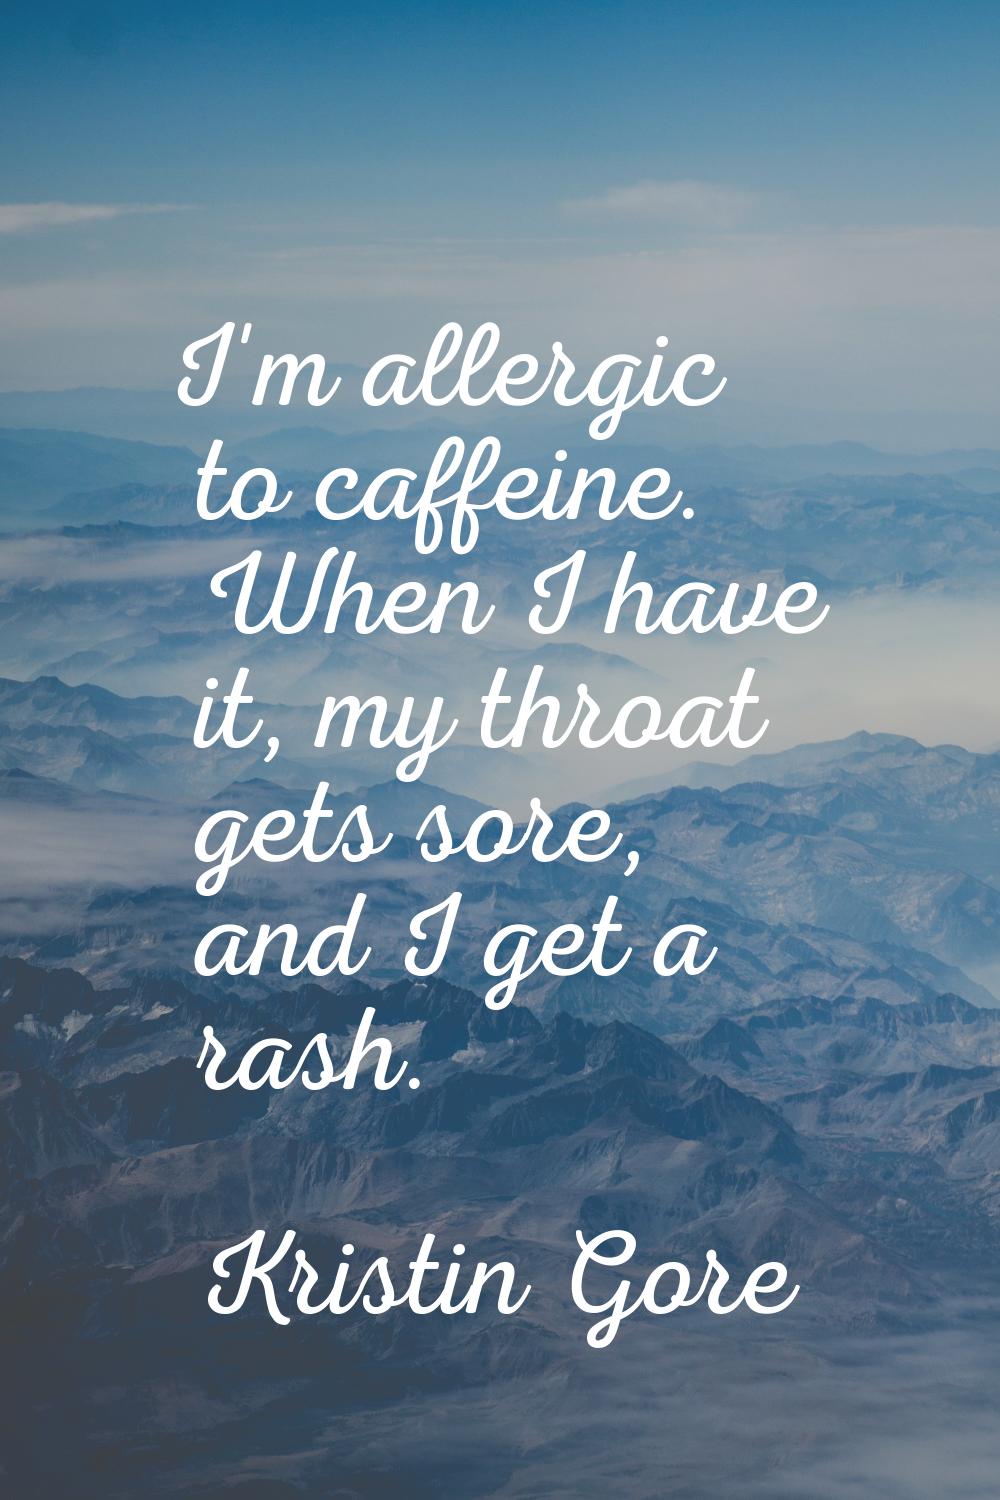 I'm allergic to caffeine. When I have it, my throat gets sore, and I get a rash.